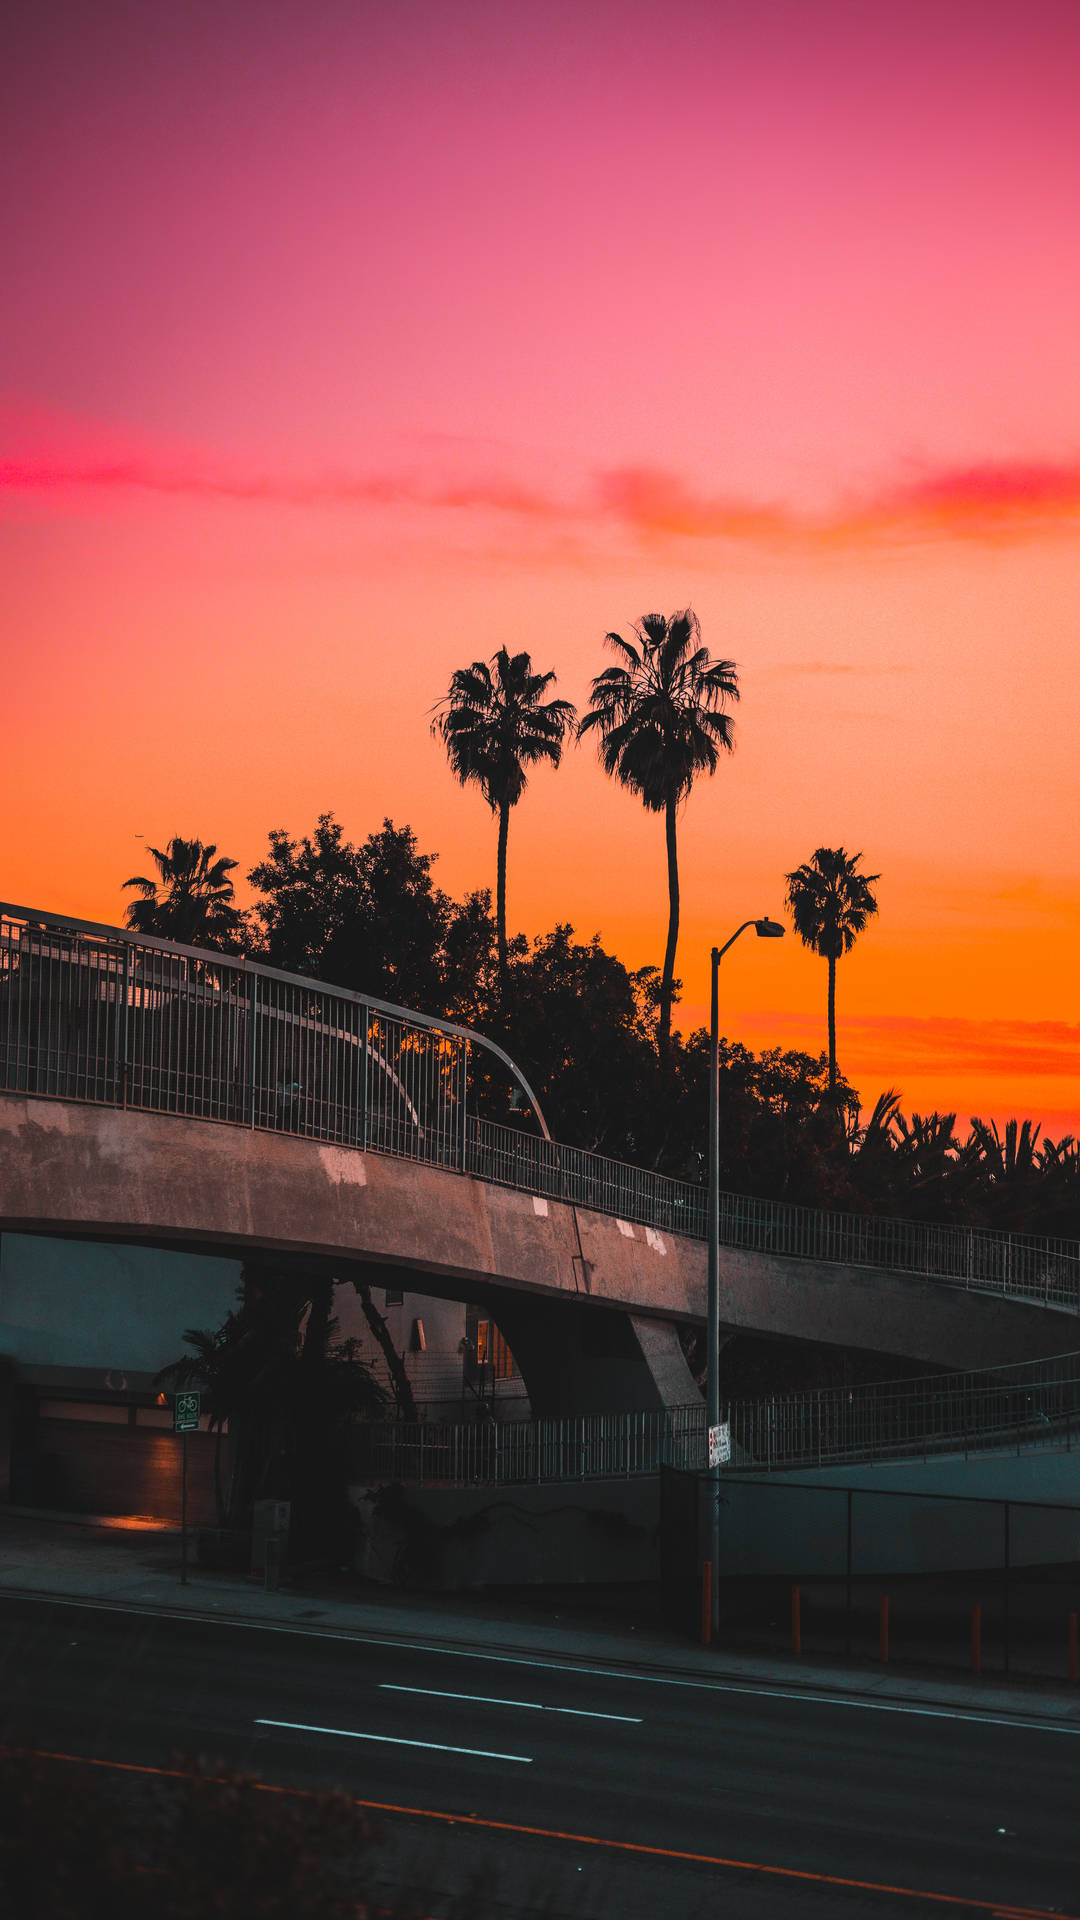 Cool Los Angeles wallpaper options to put on your desktop background